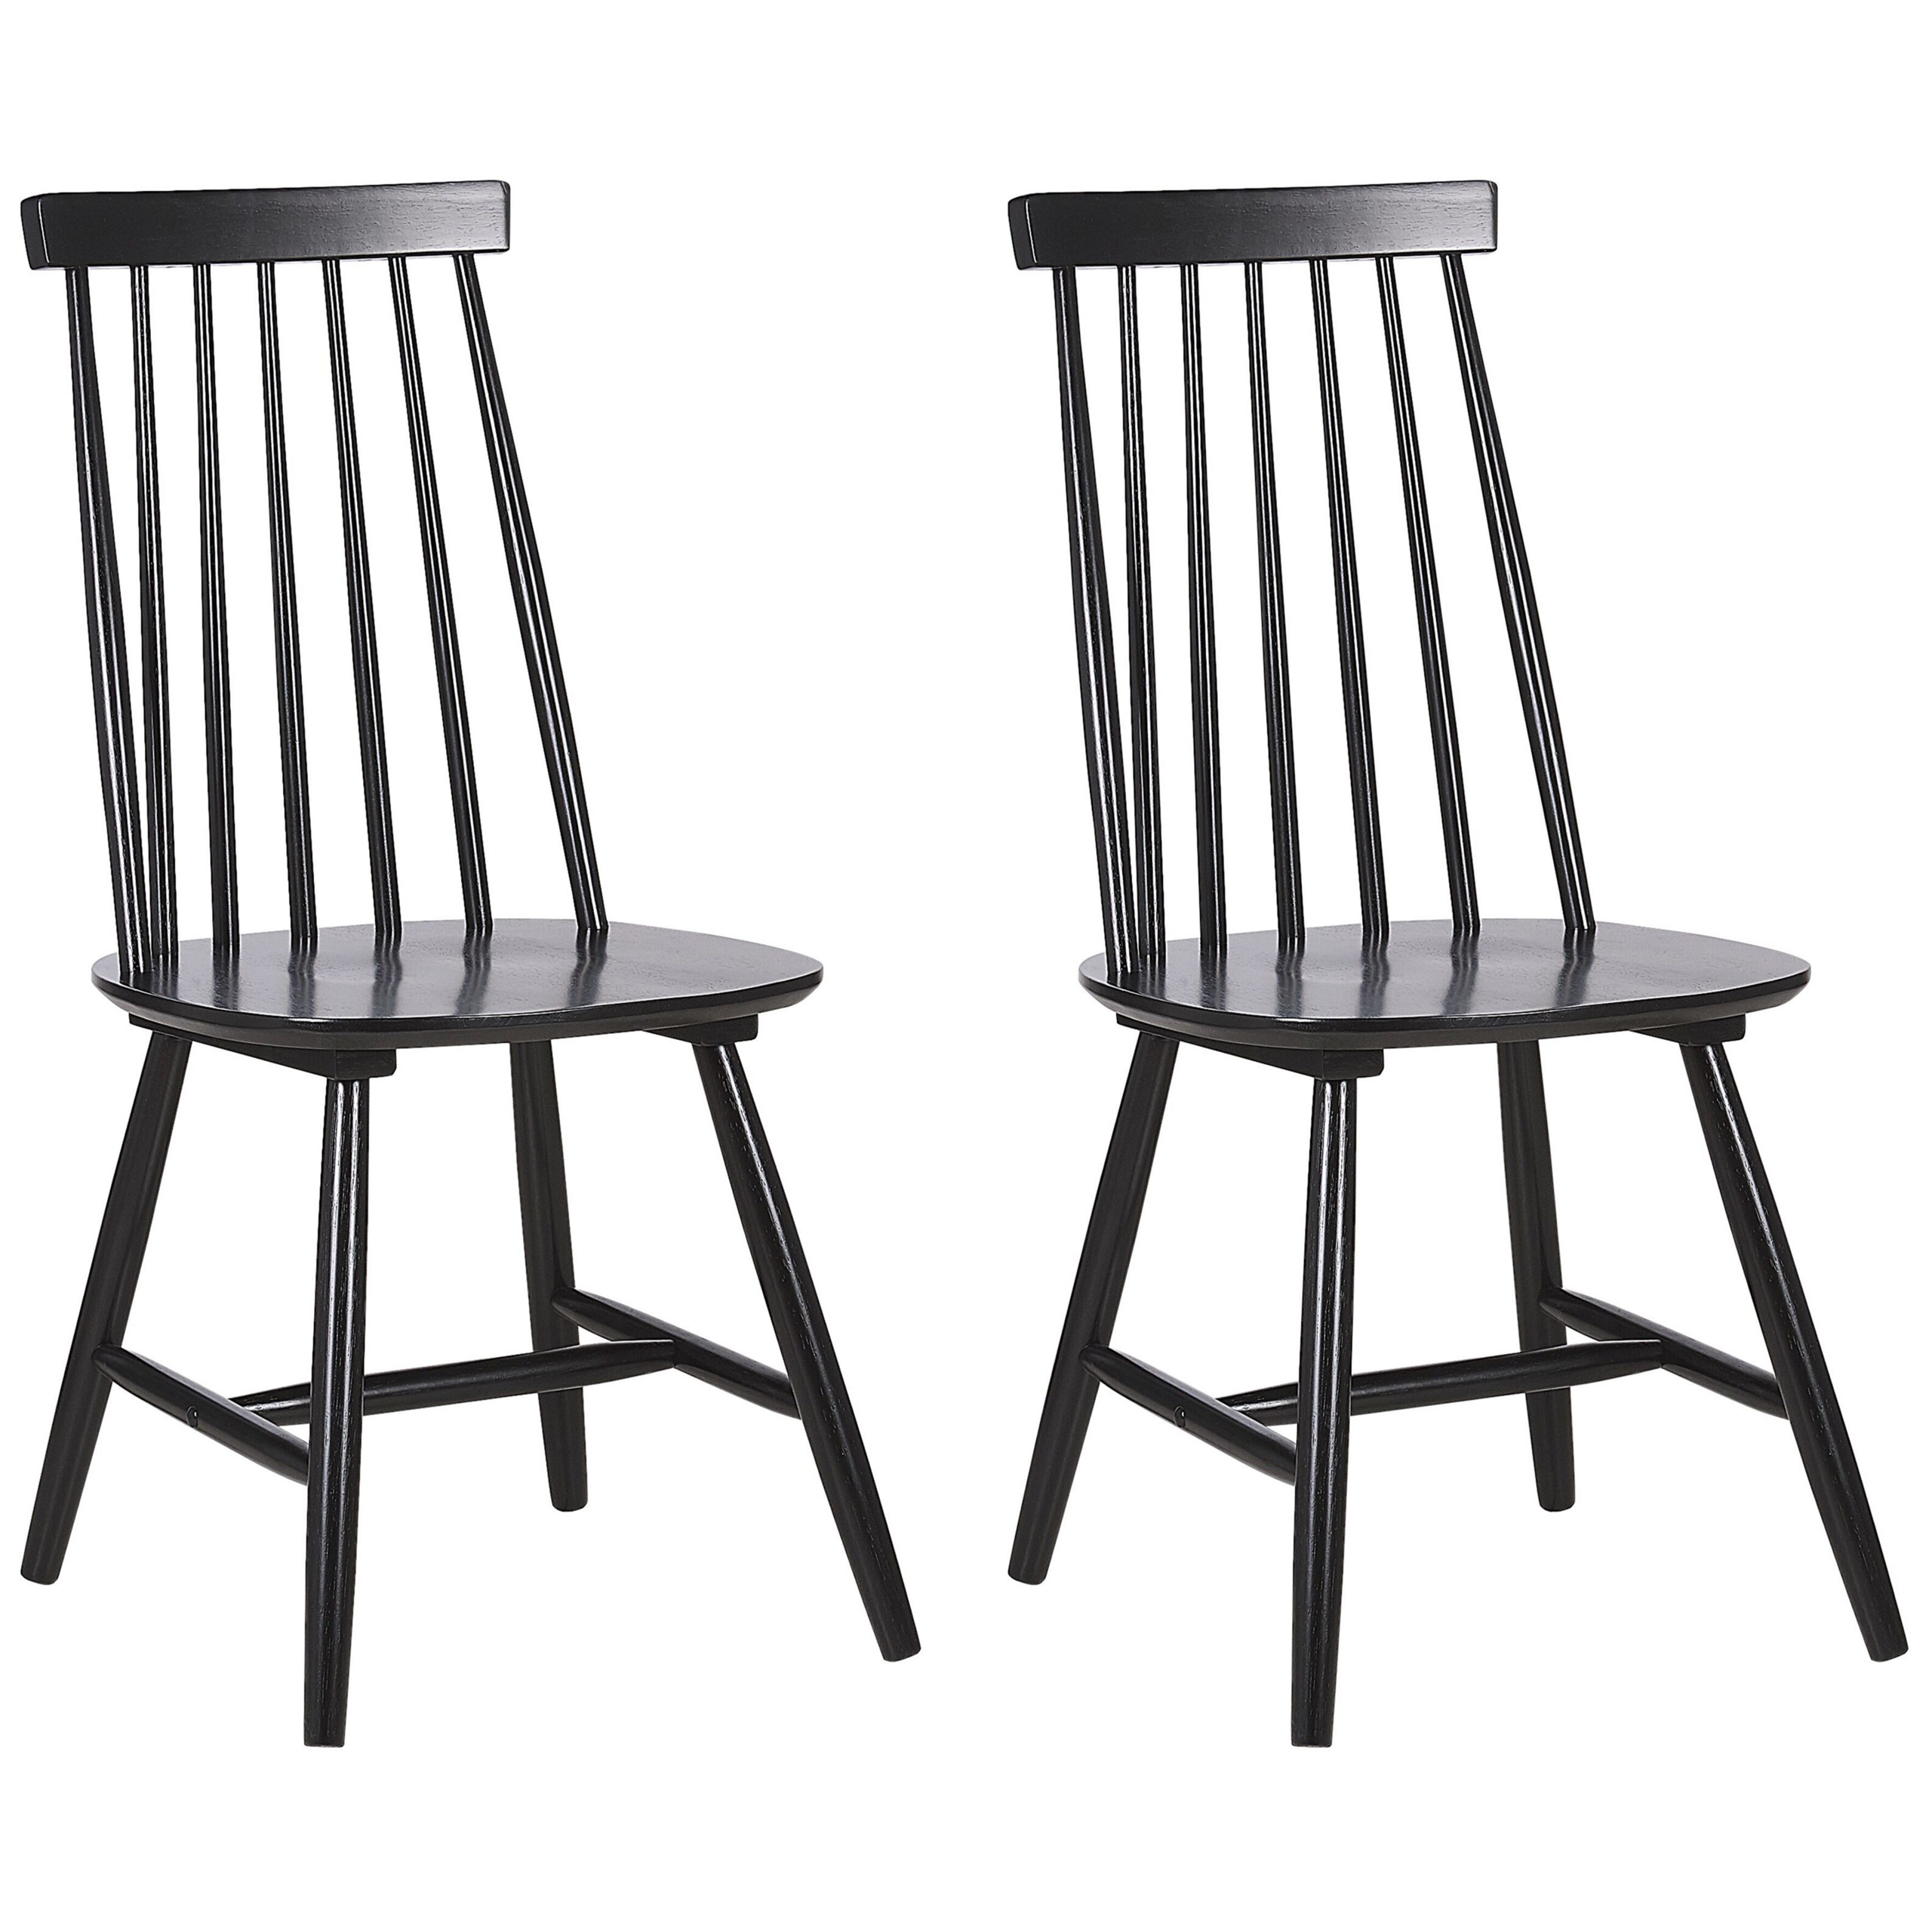 Beliani Set of 2 Dining Chairs Black Solid Wood Spindle Backrest Kitchen Chair